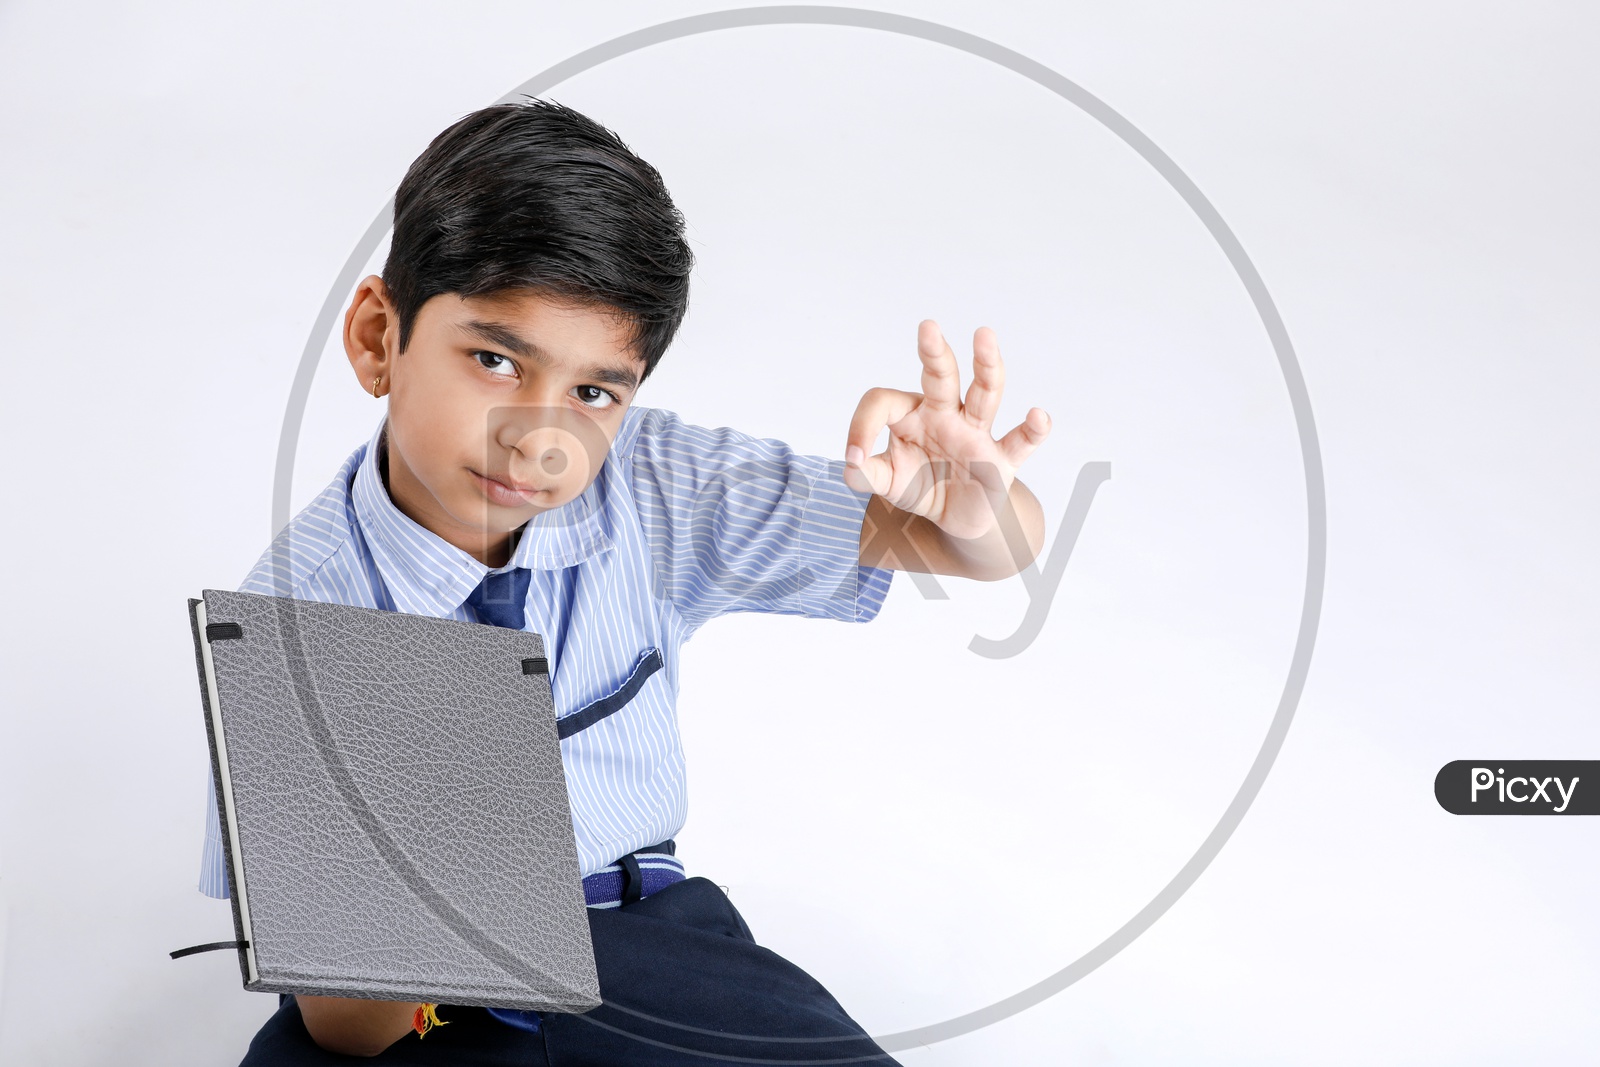 Indian Or Asian Kid Or Boy Or Student   In School Uniform  Holding a Book And Posing Over an Isolate White Background